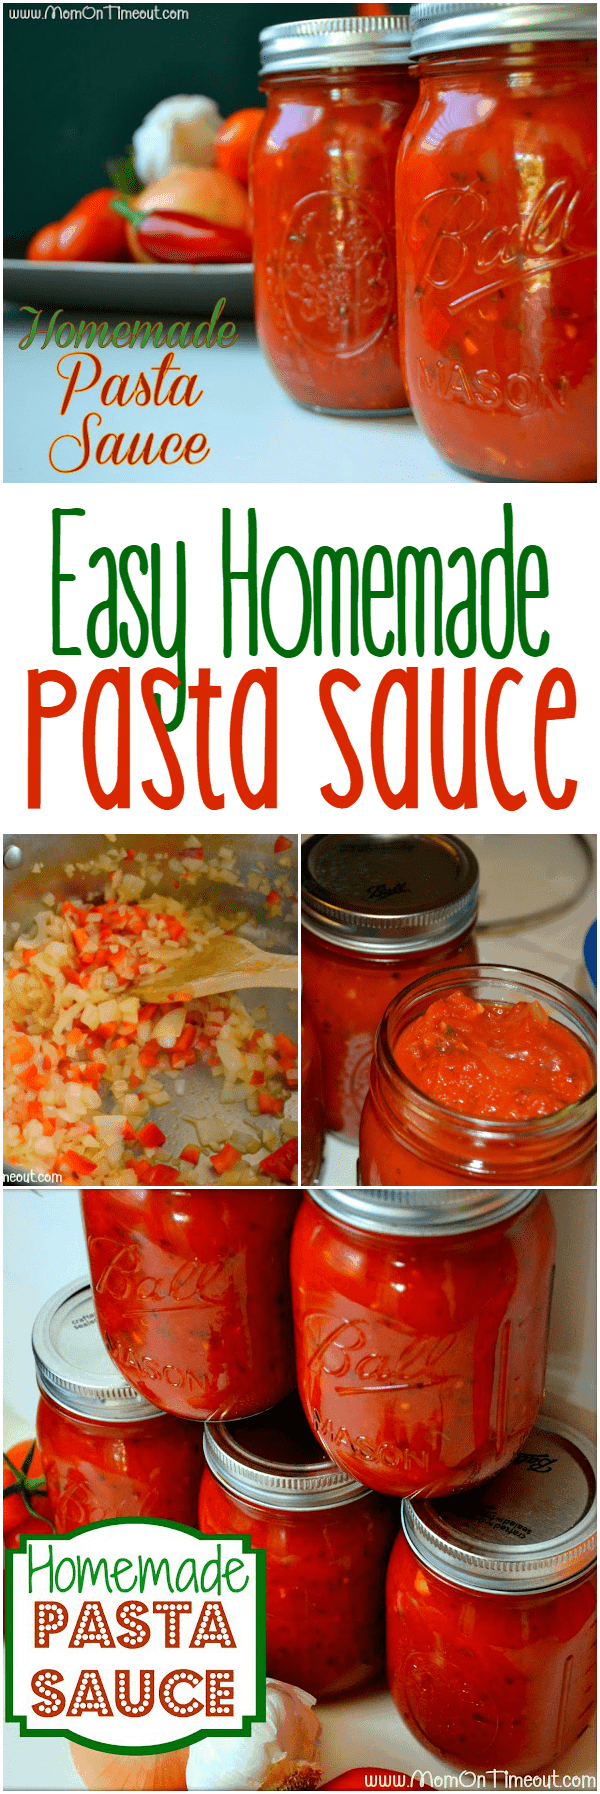 This Easy Homemade Pasta Sauce recipe is a great way to use all those fresh veggies in your garden! Not into canning? No worries, this sauce can be frozen in ziploc bags as well! | MomOnTimeout.com